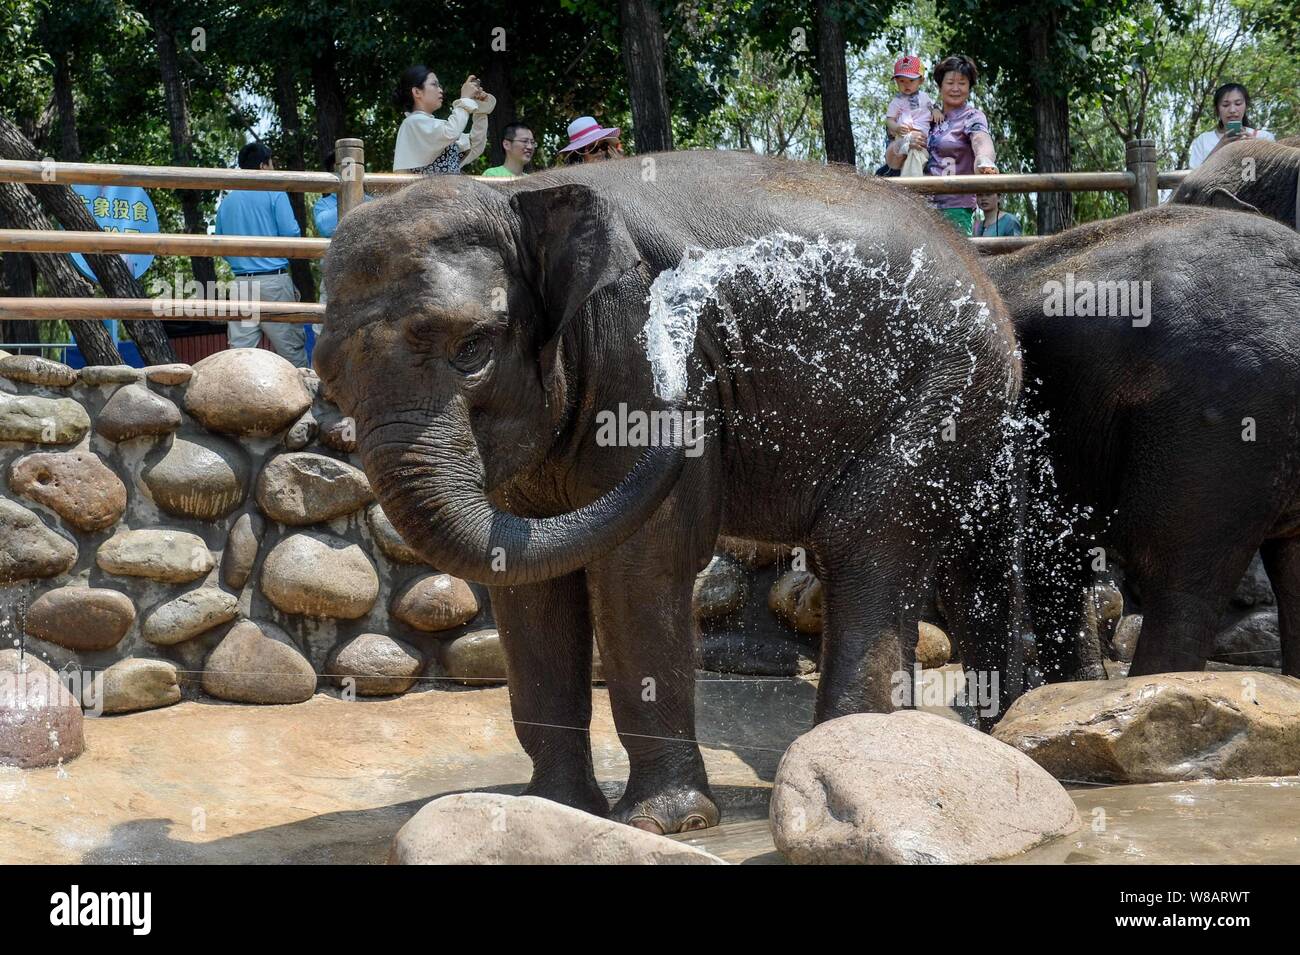 An elephant enjoys a splash of water to cool off on a scorcher at Beijing Wildlife Park in Beijing, China, 25 June 2016. Stock Photo